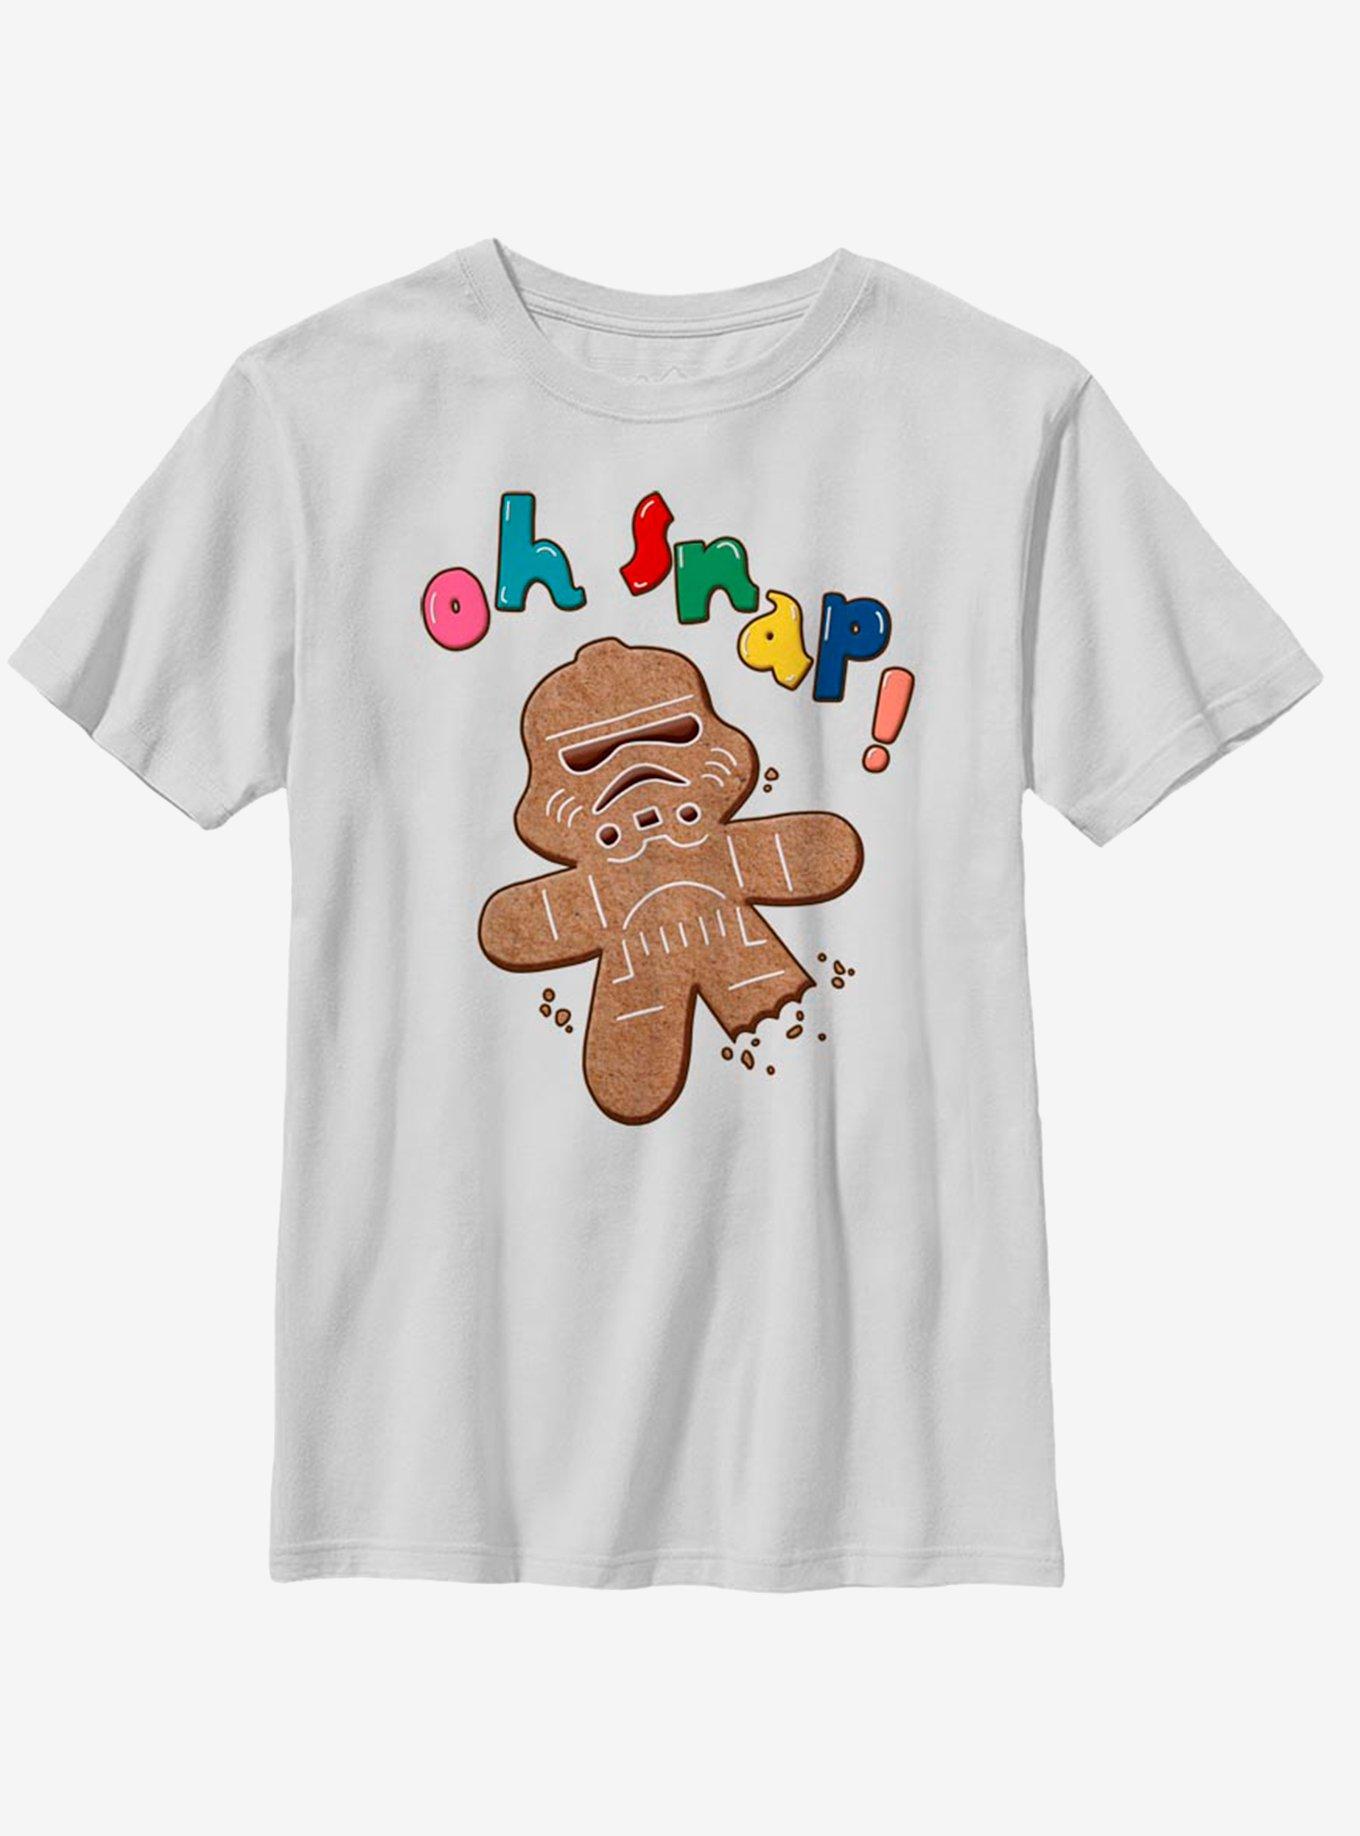 Star Wars Storm Trooper Gingerbread Youth T-Shirt, WHITE, hi-res